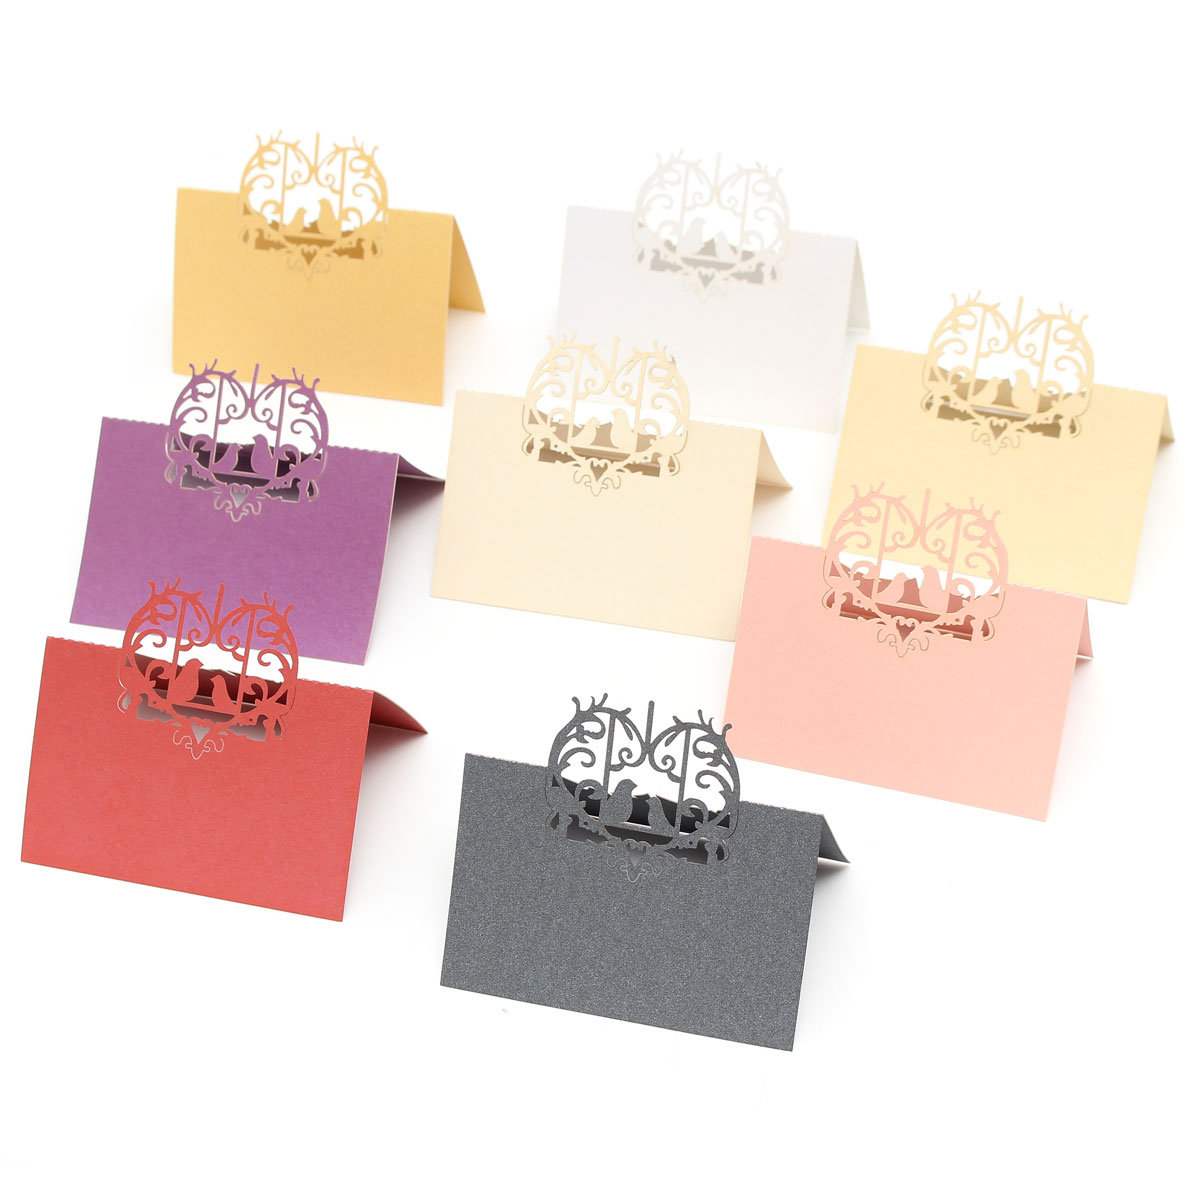 

10Pcs Laser Cut Love Birds Table Name Place Cards Wedding Party Favor Gift Accessories, White white pink red black gold purple